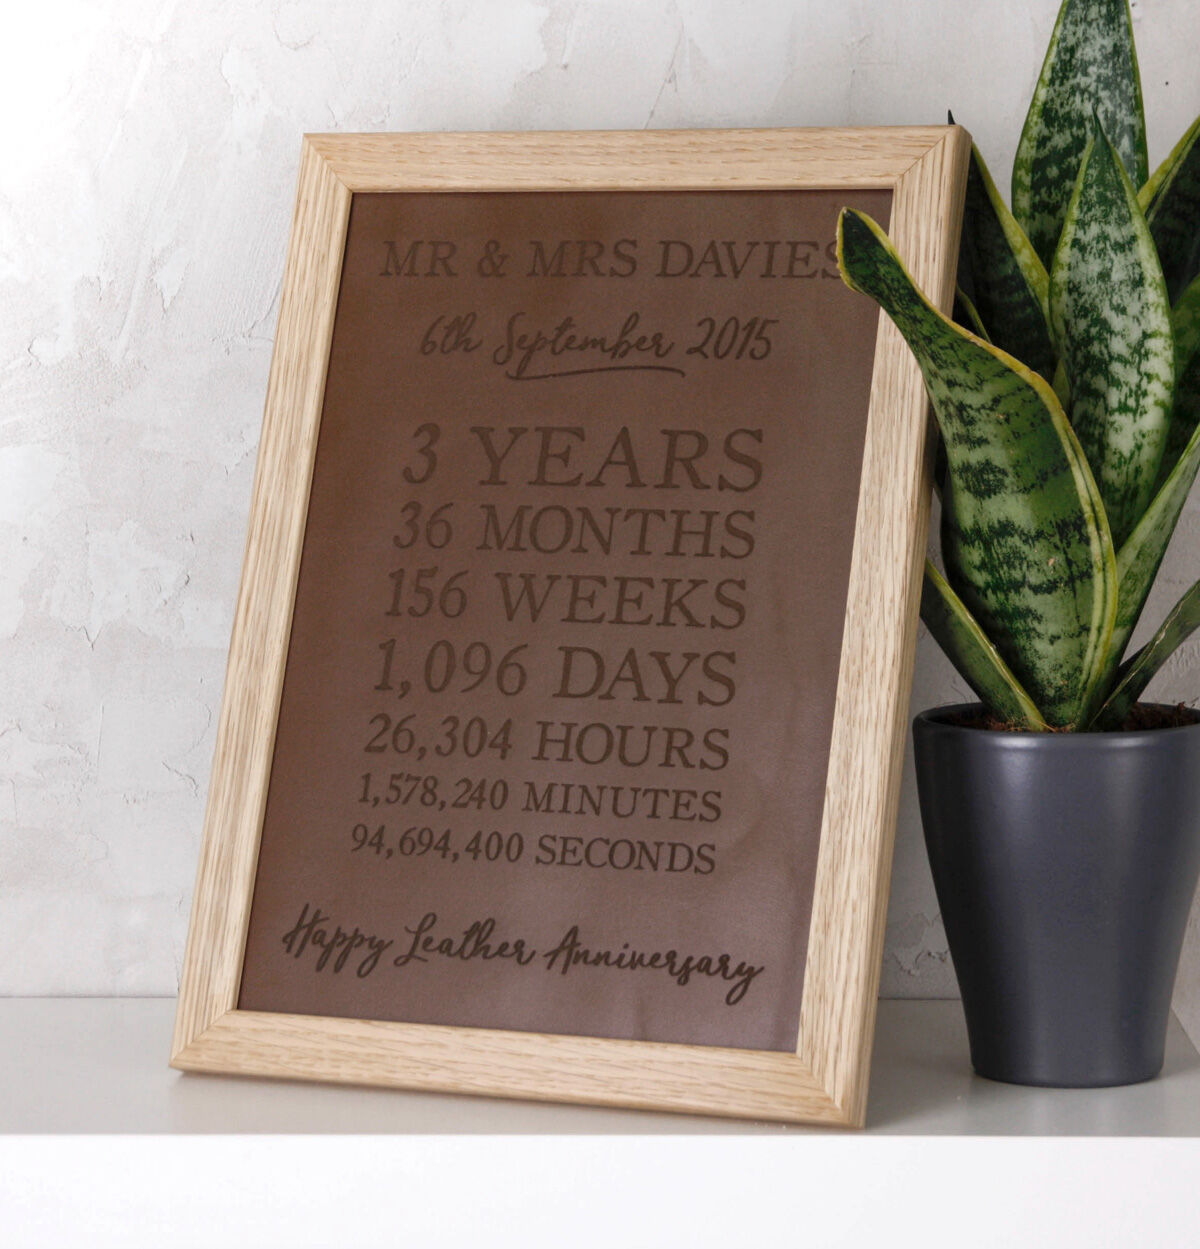 3-Year Anniversary Gifts for Her: 27 Ideas to Make Her Day Special - Groovy  Groomsmen Gifts